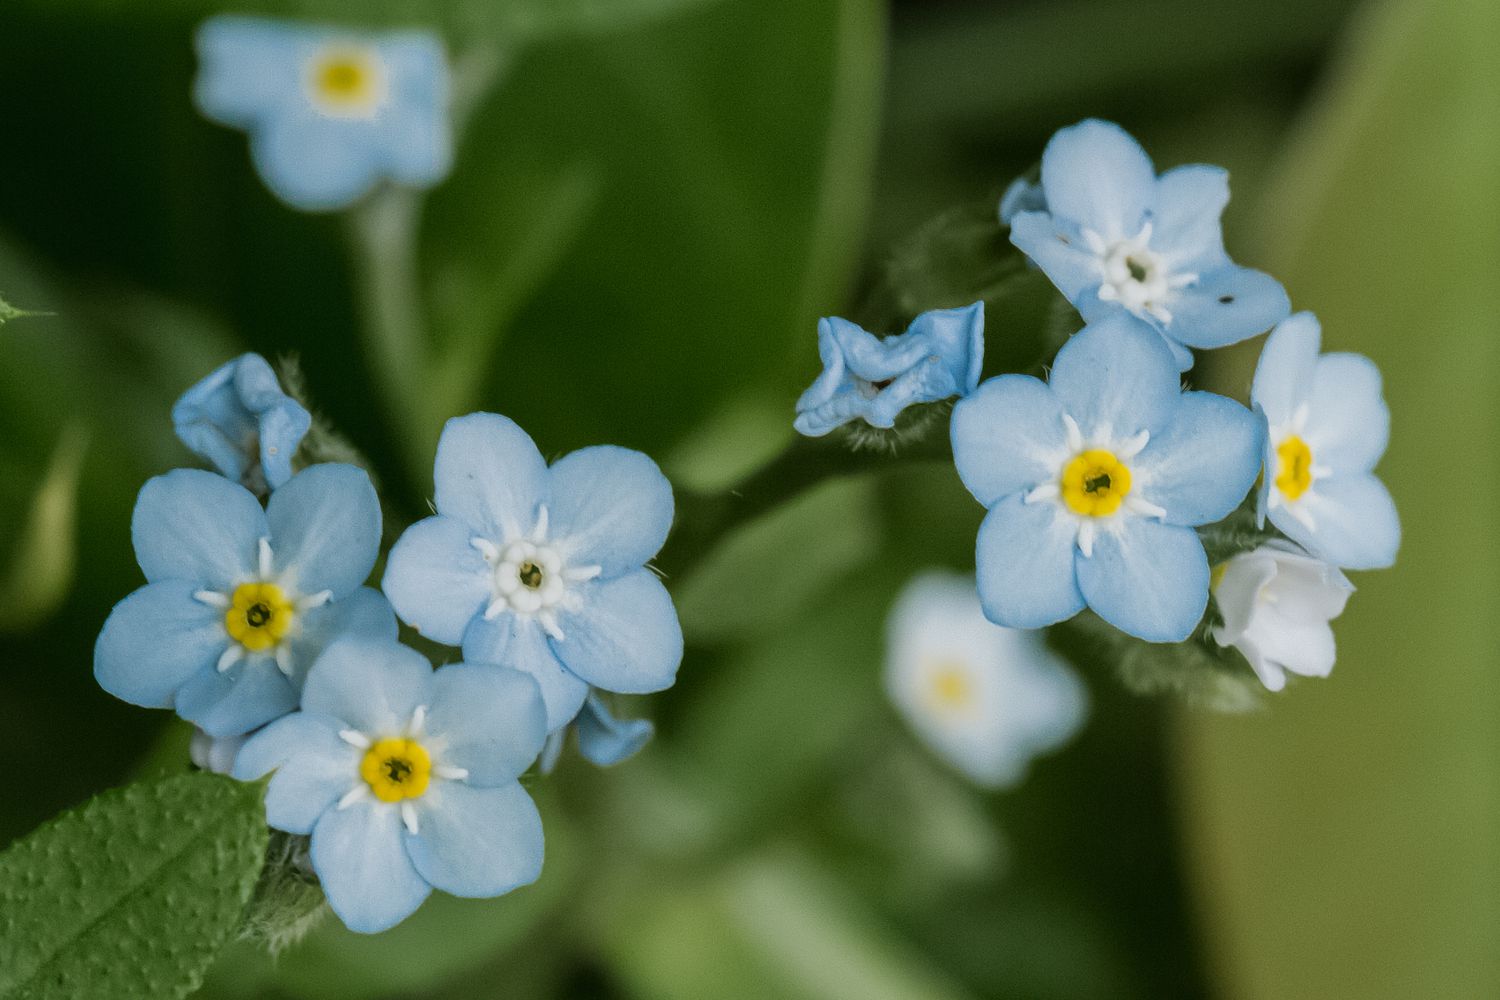 How to grow and care for Forget-Me-Not flowers